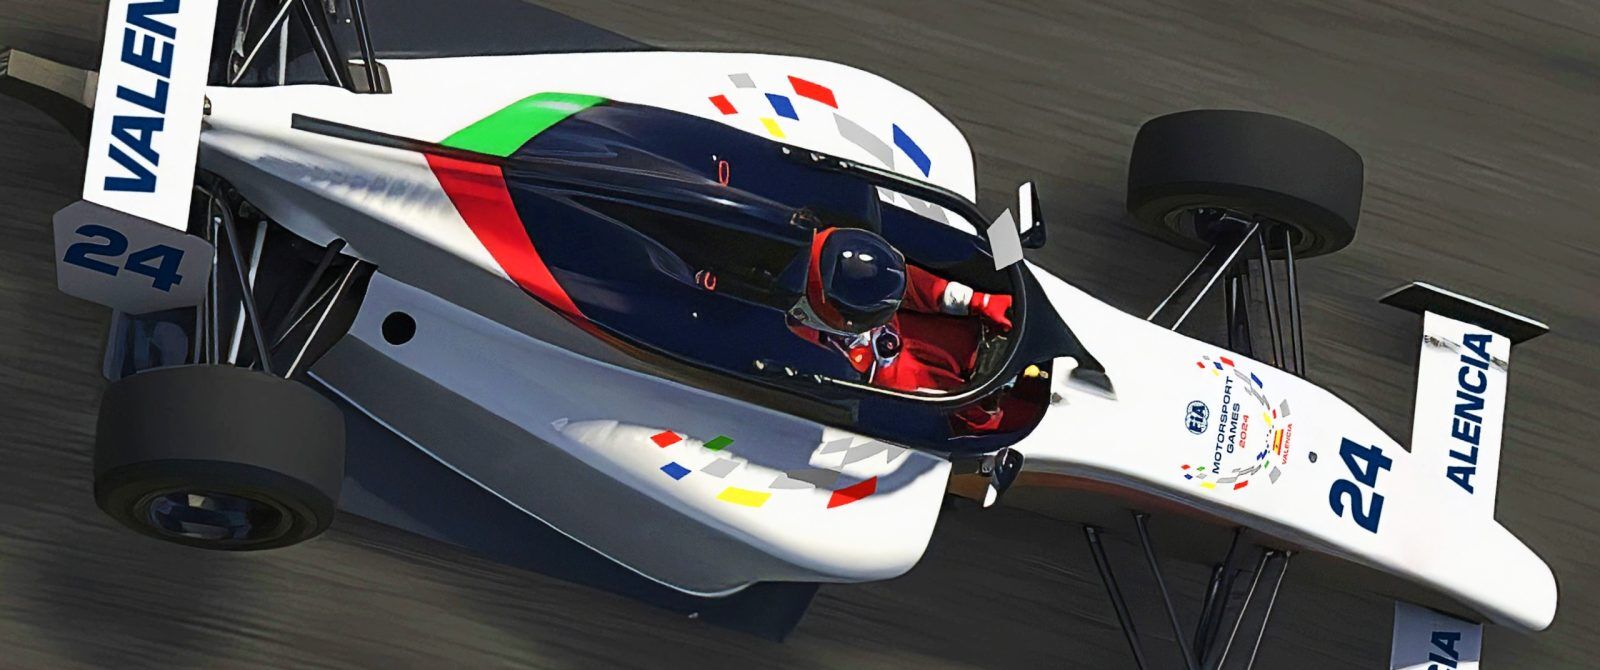 A white single seater car with FIA logos and the word Valencia written on the front and rear wings.